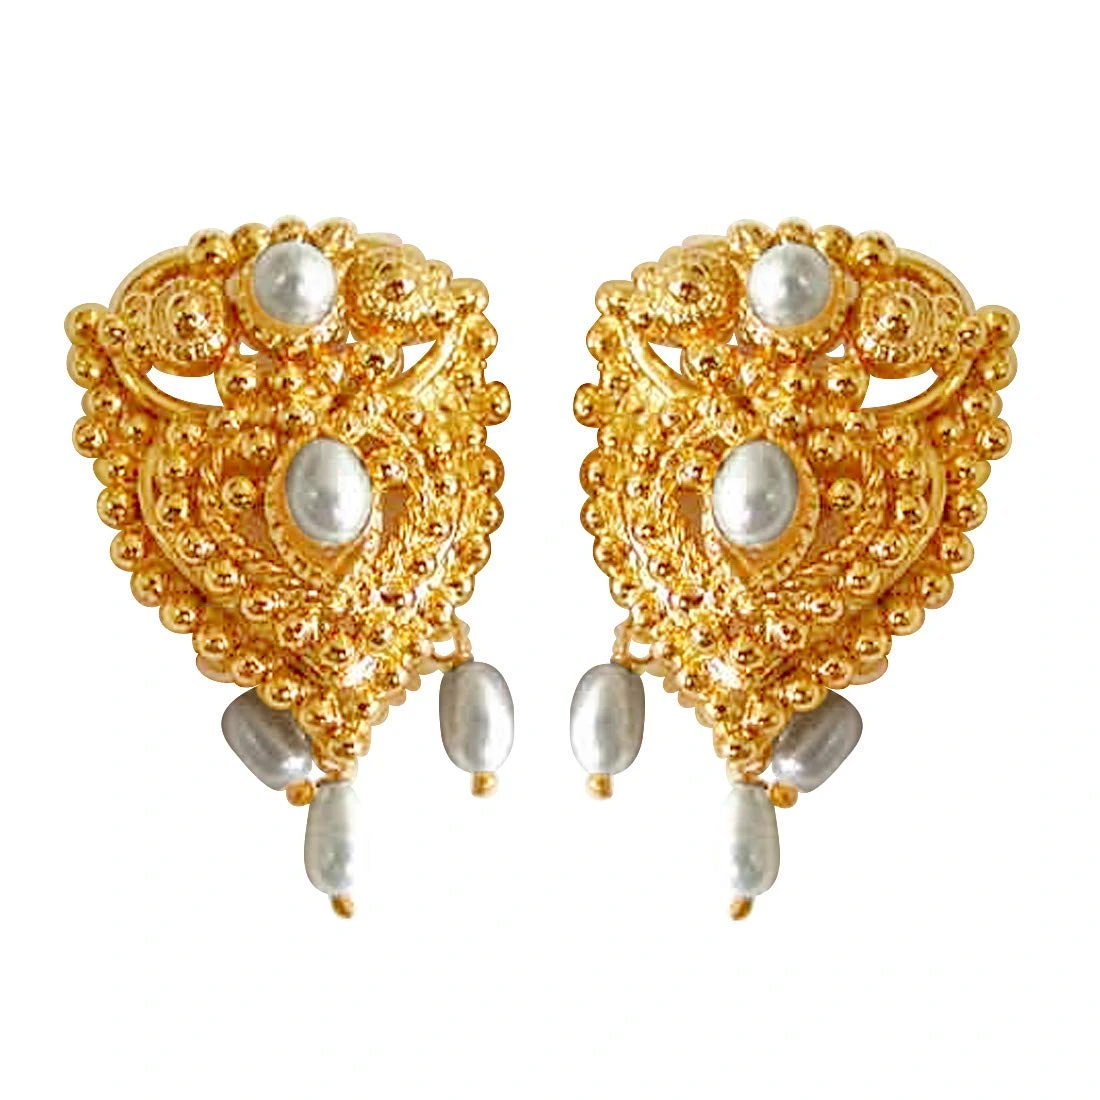 Temple Shaped Freshwater Pearl & Gold Plated Earrings for Women (SE64)